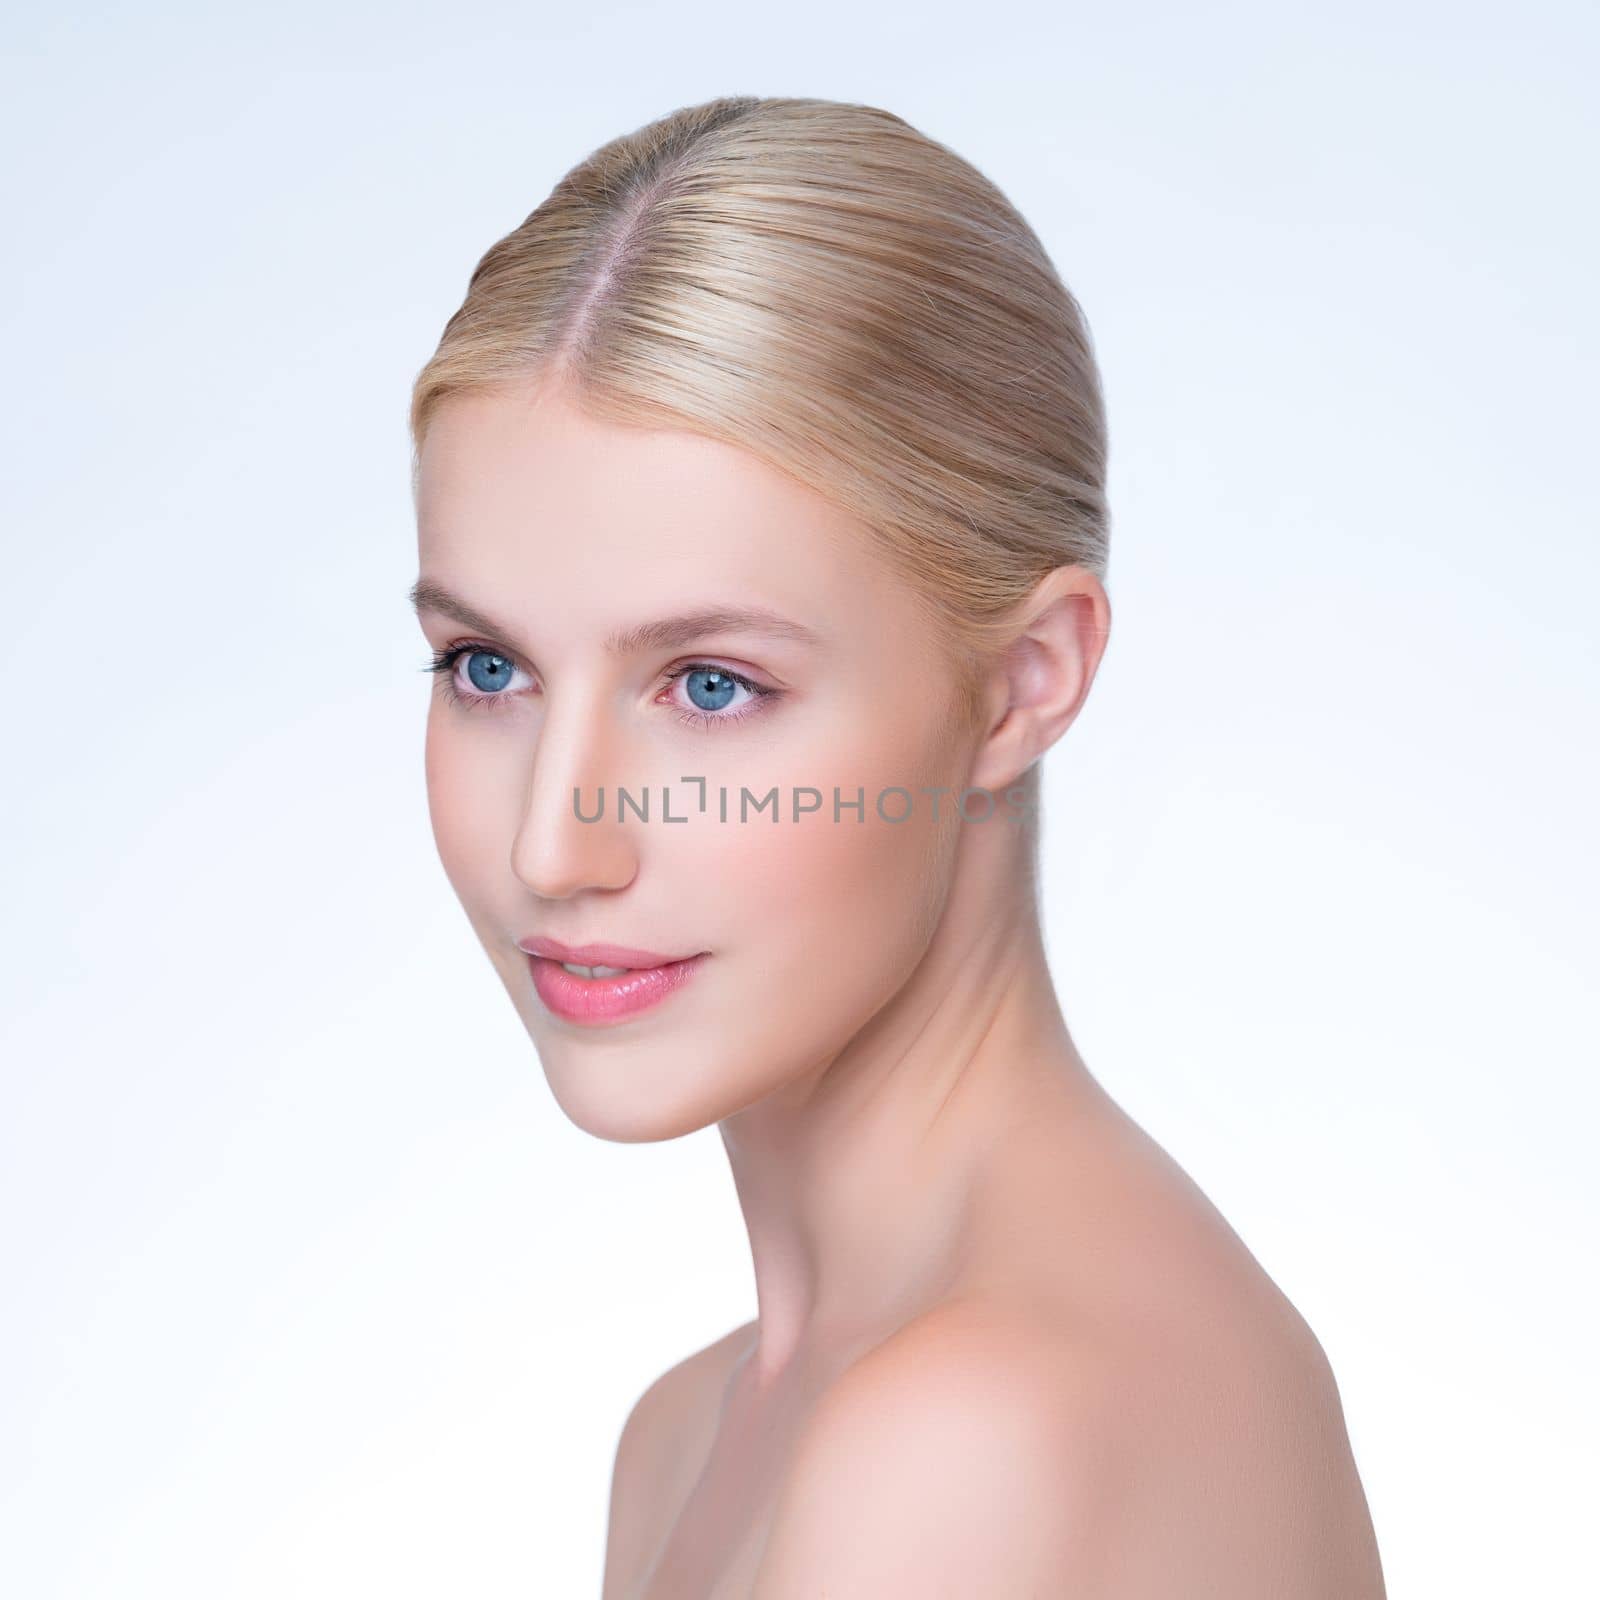 Personable beautiful woman with perfect smooth skin portrait. by biancoblue